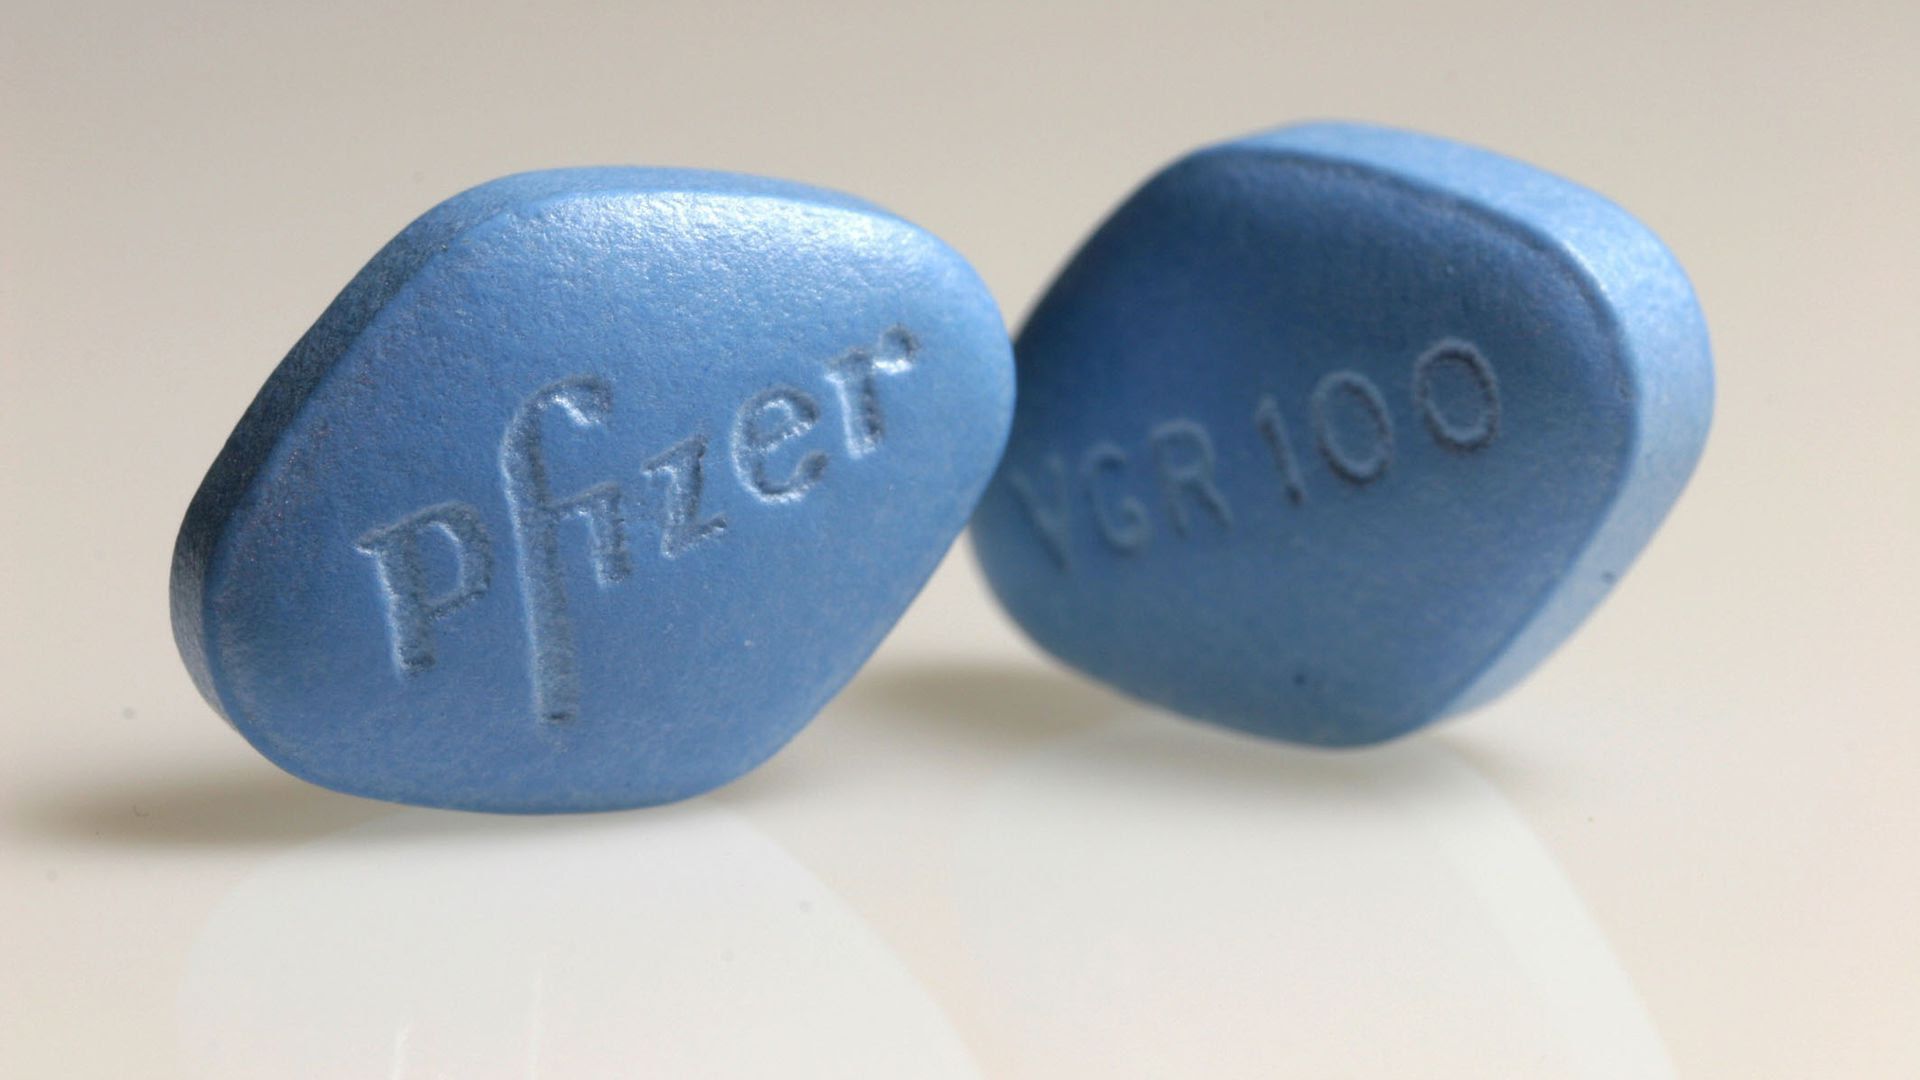 what color is a viagra pill